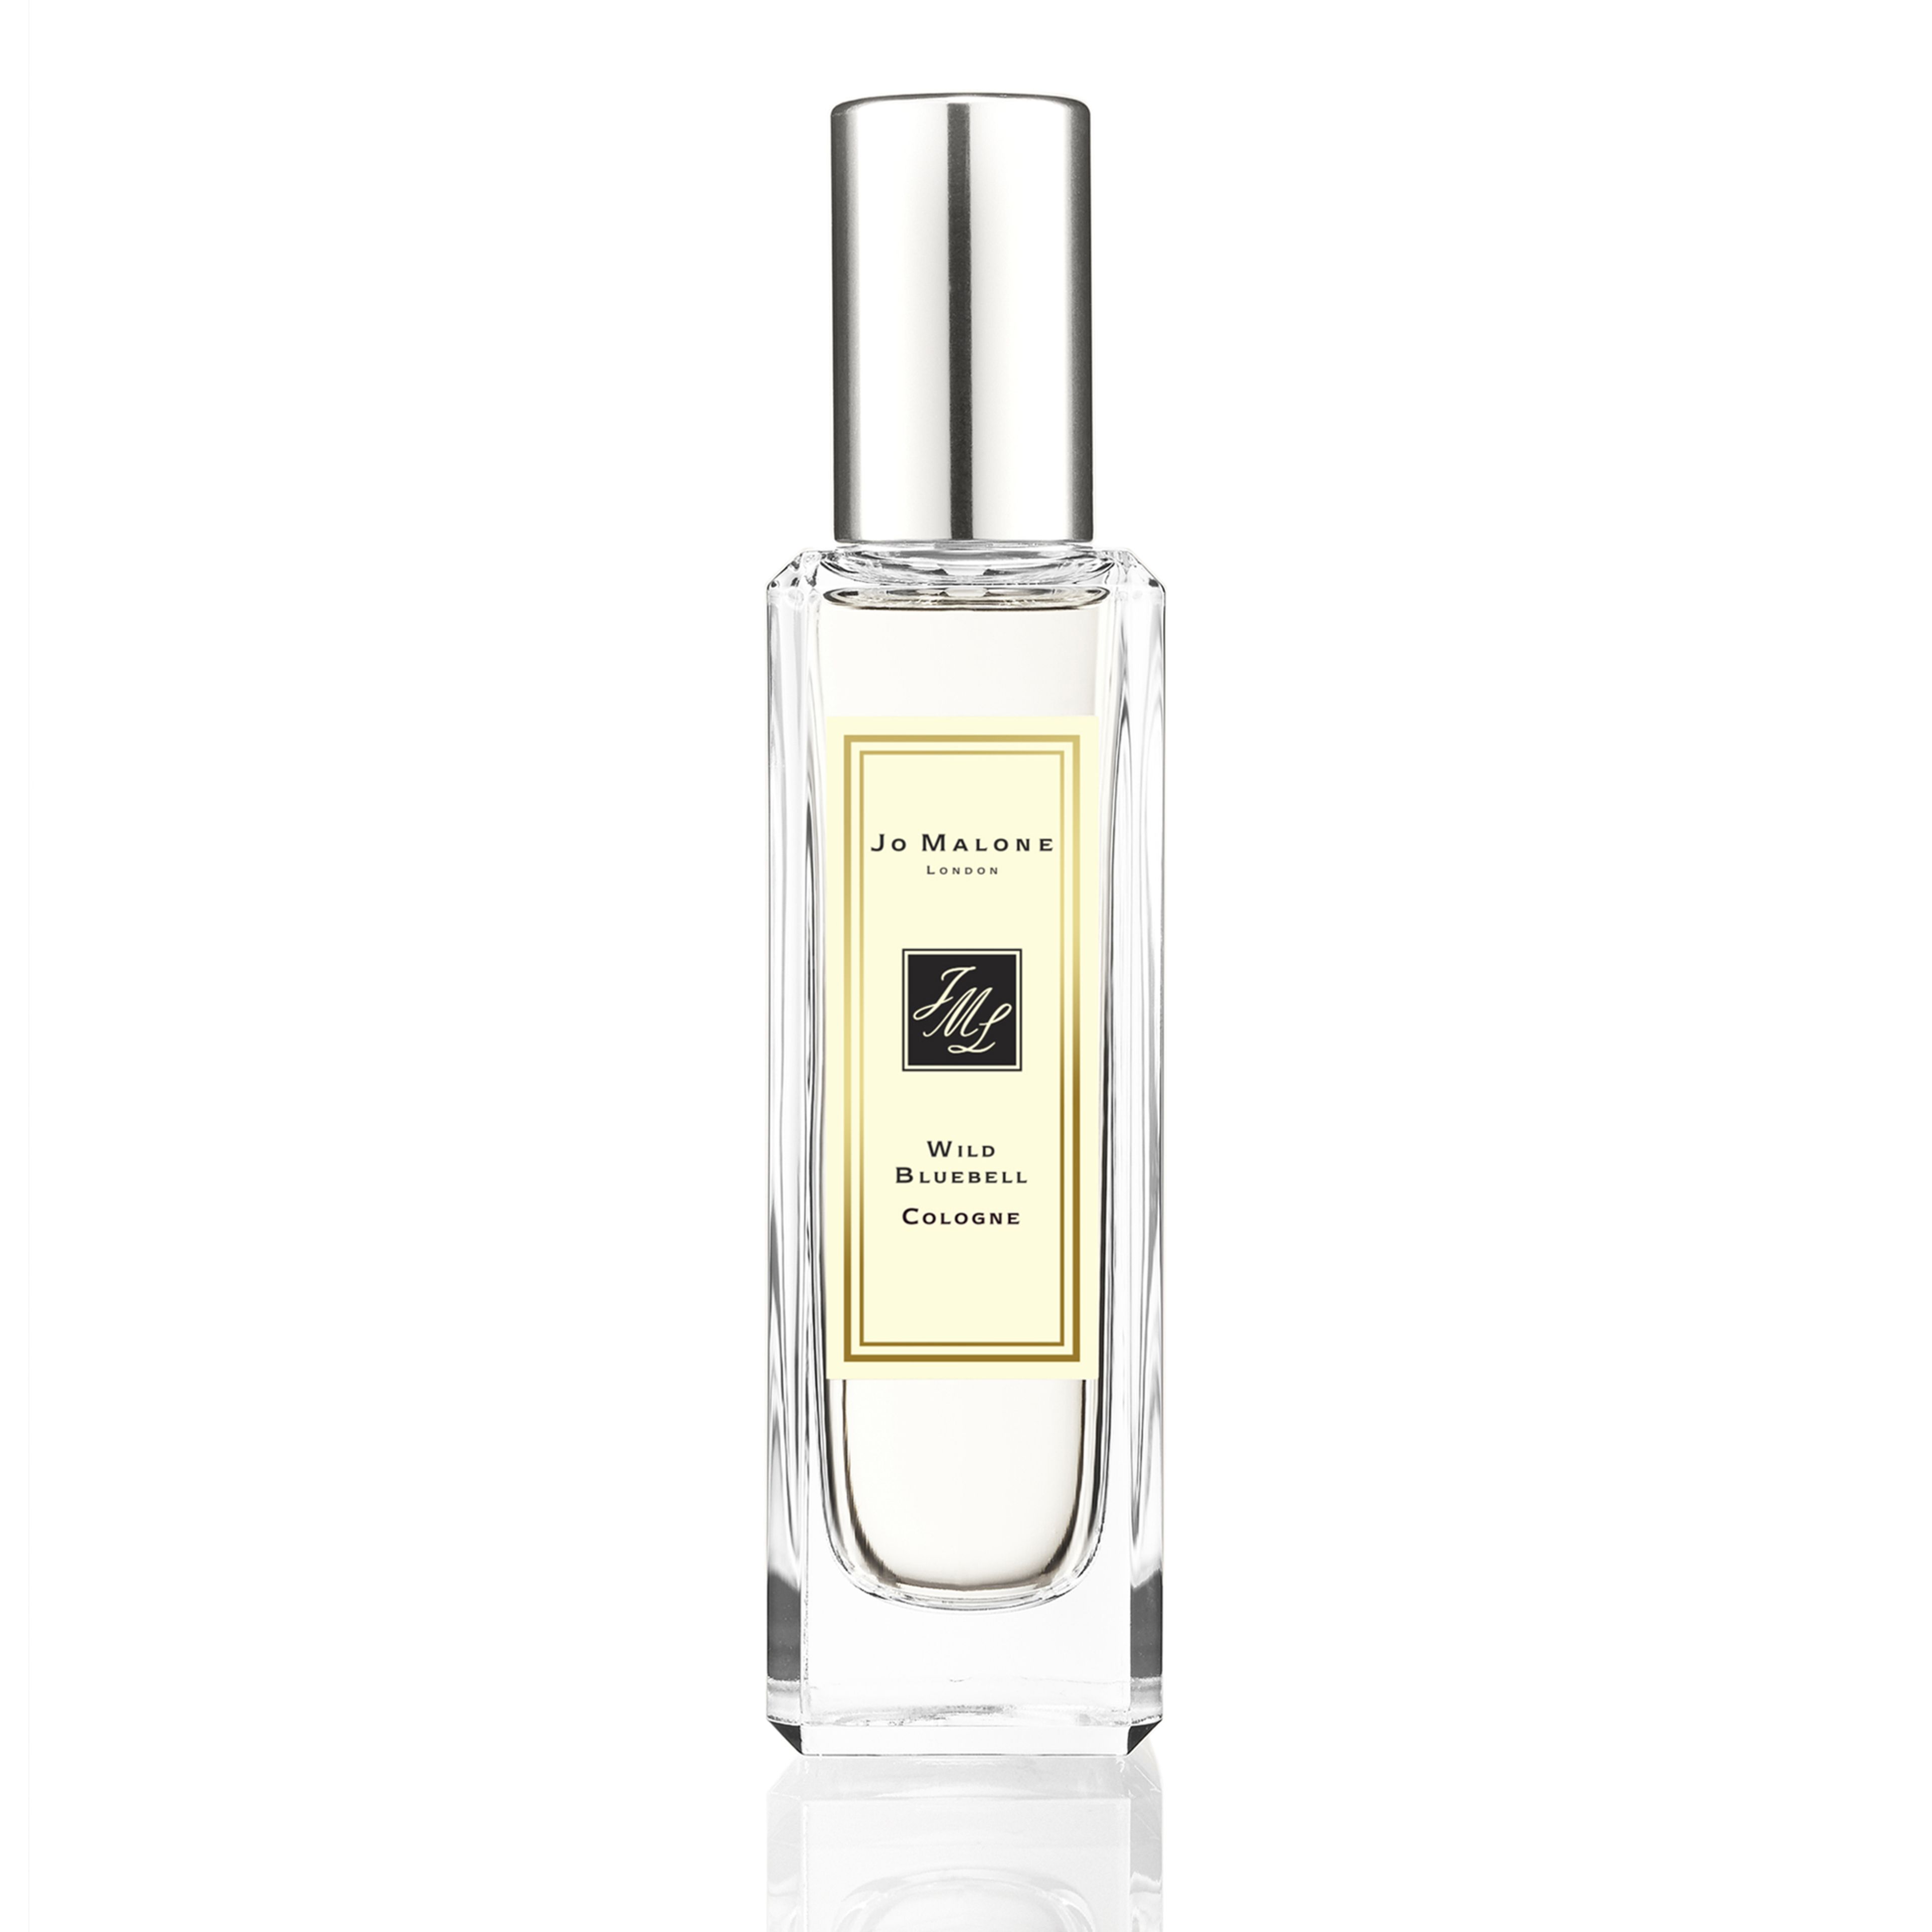 Jo Malone Wild Bluebell Cologne 1